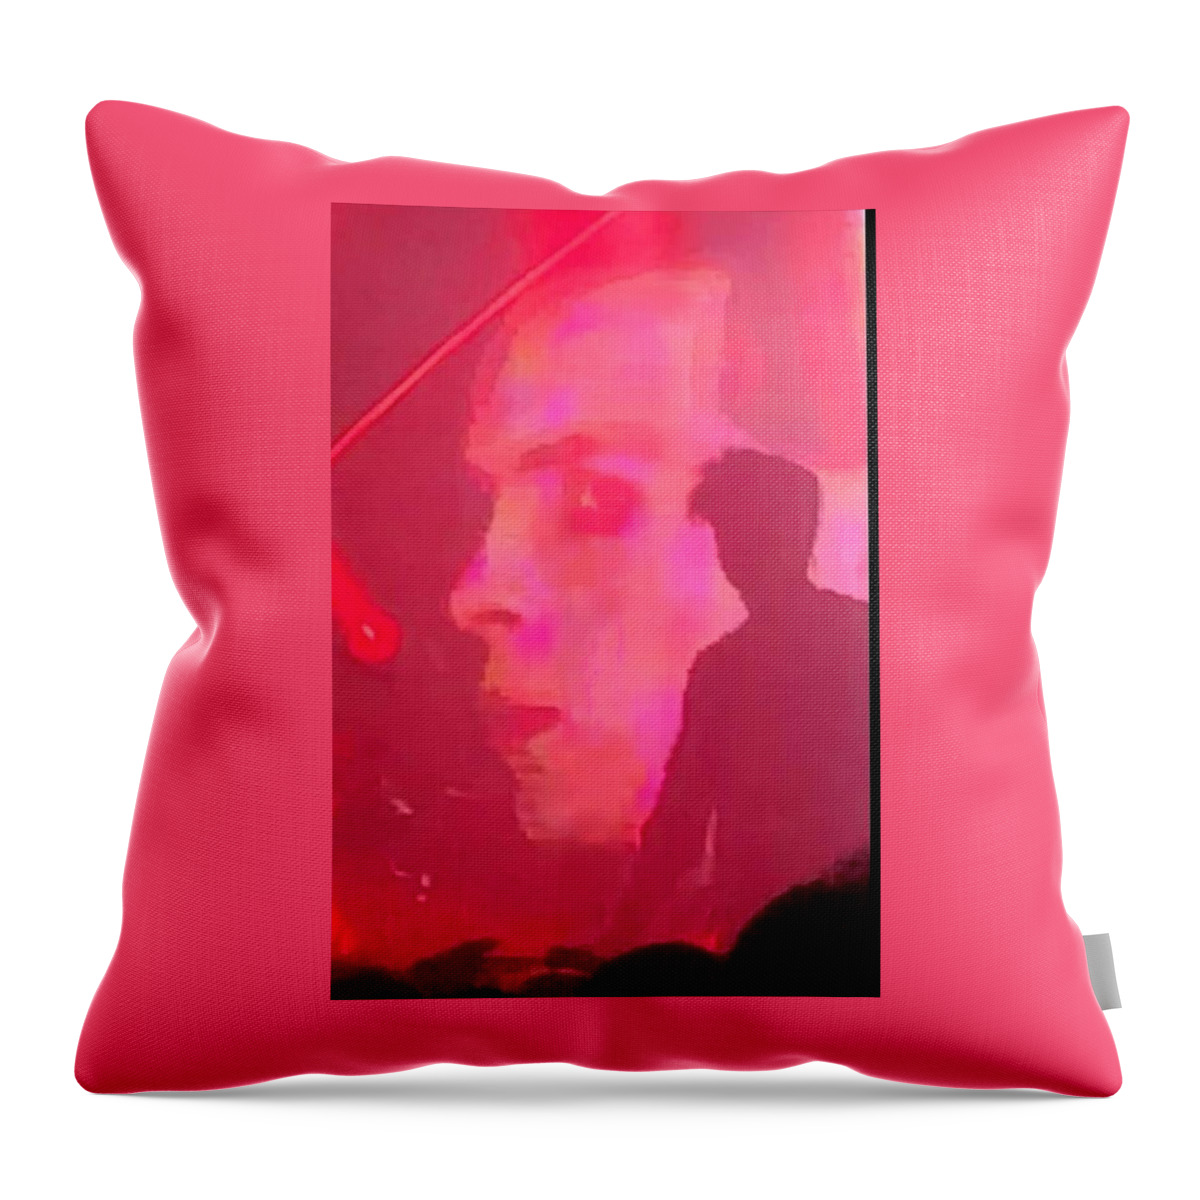  Throw Pillow featuring the photograph Gary Numan Past And Present by Gordon James